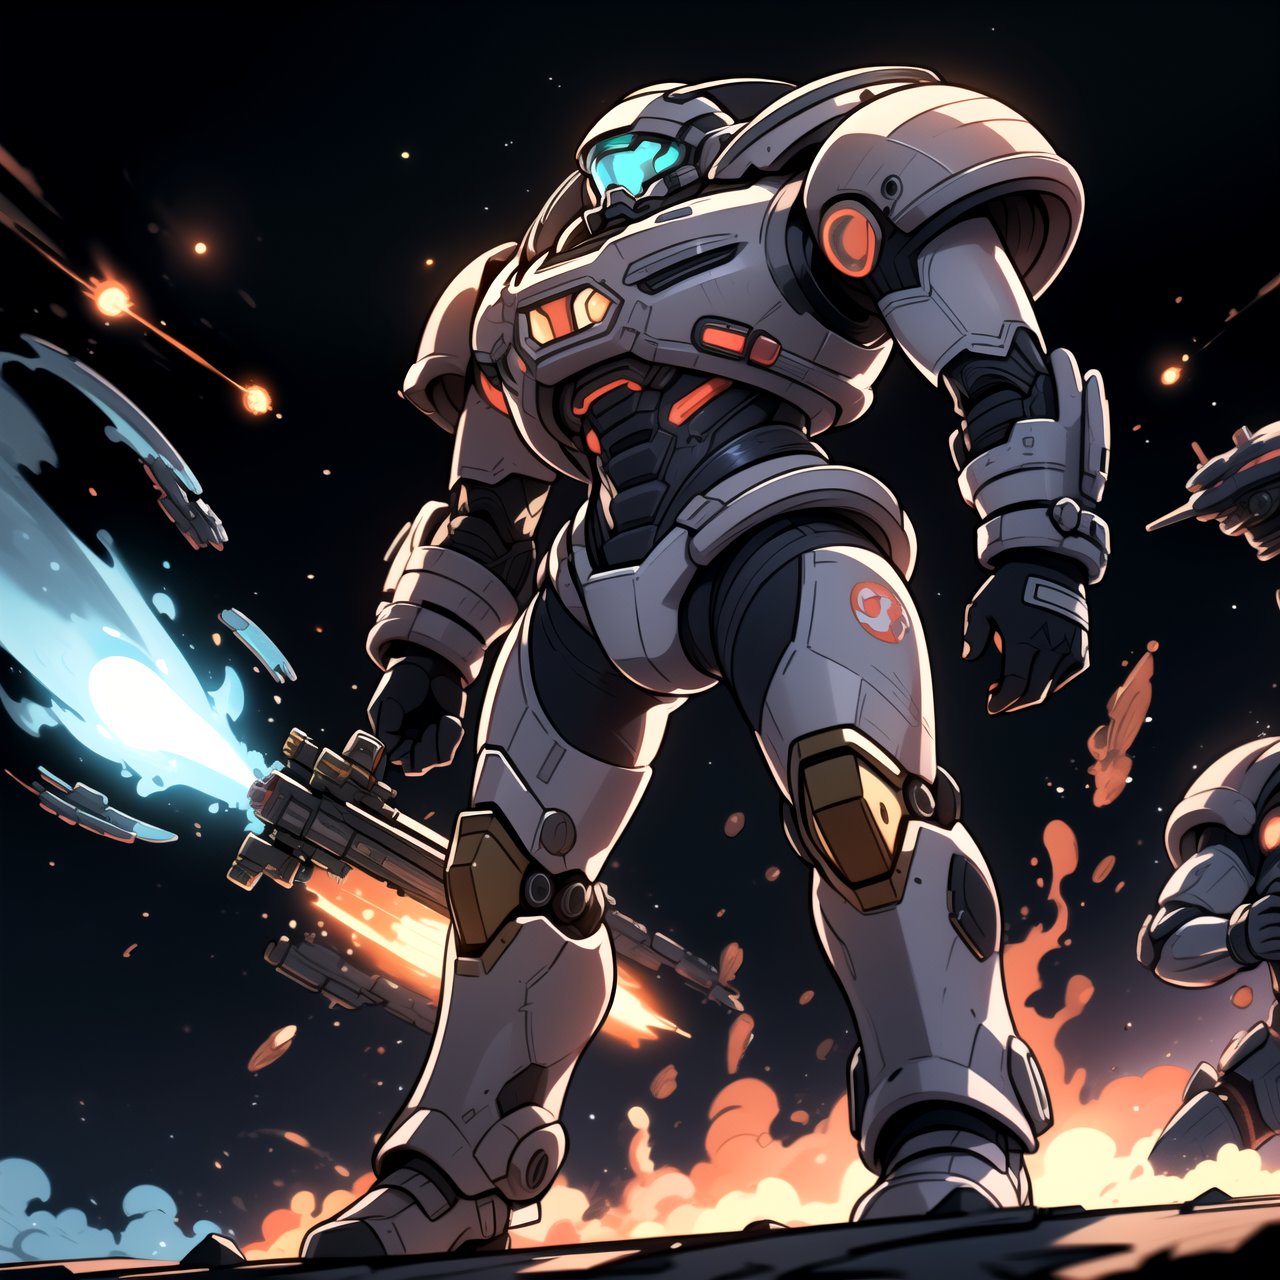 (masterpiece, best quality), (4K, HDR), ((Starcraft)), Battle-Ready Terran:
"Generate an image of a Terran Space Marine in full combat armor, standing in a futuristic battlefield. The marine holds a massive gauss rifle, with the armor's blue and gray tones highlighted by battle scars and glowing visor."